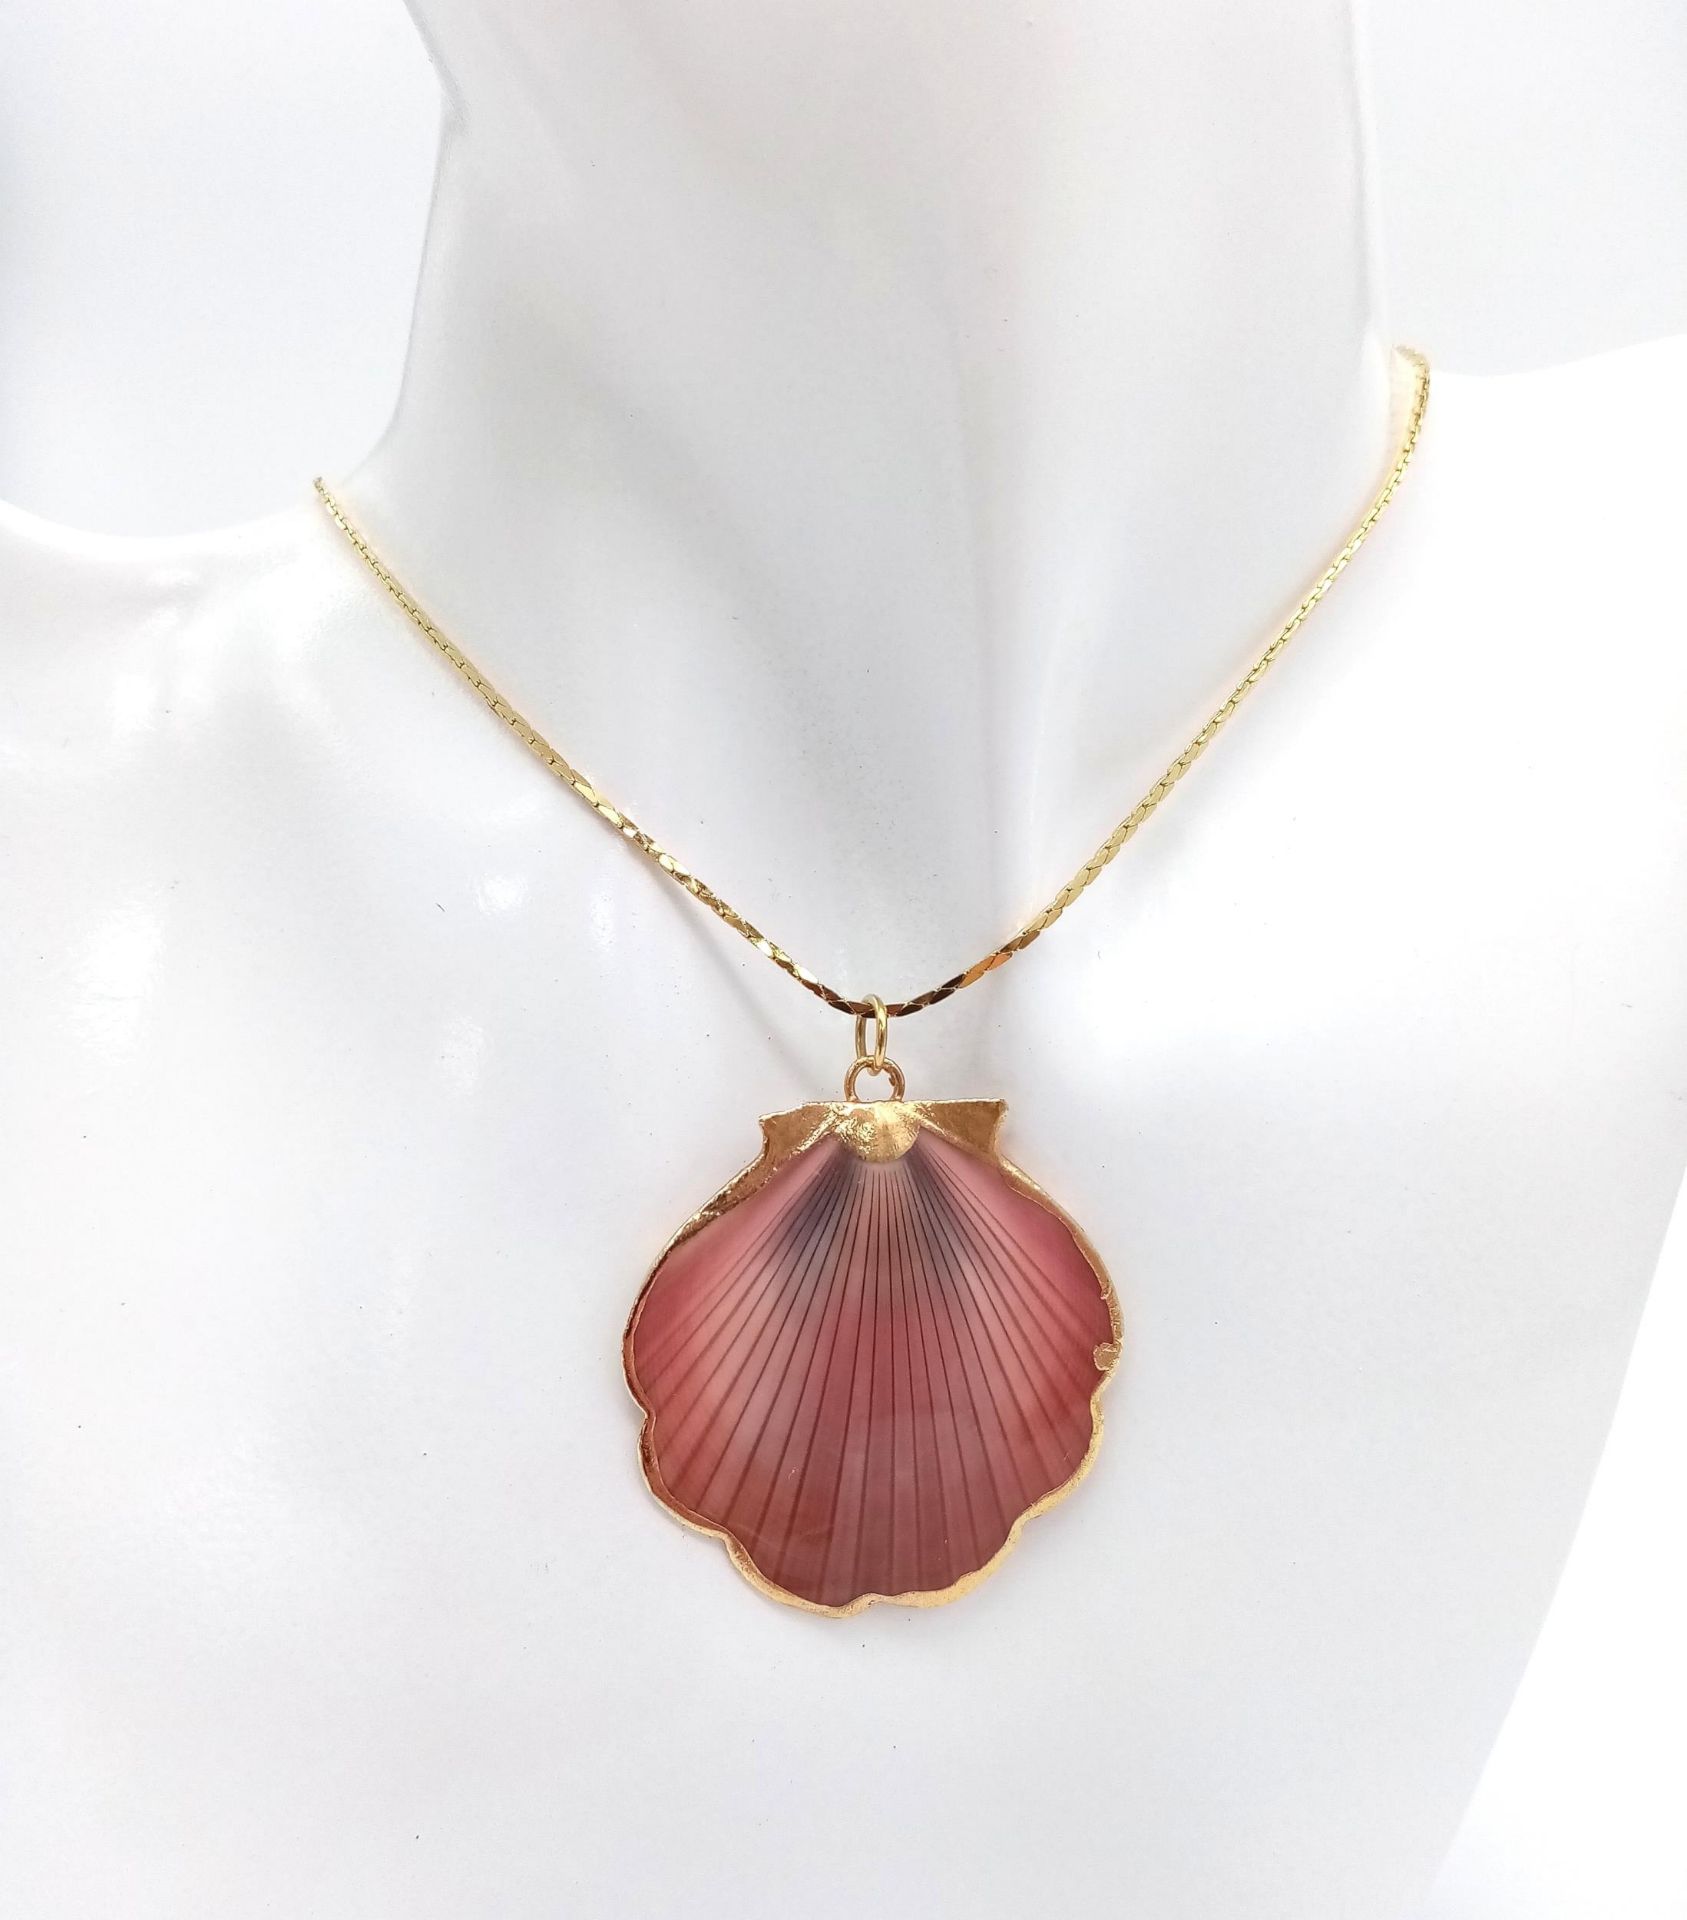 A 24 Carat Gold Plated Sea Shell Design Necklace and Matching Earring Set. Necklace 60cm Length, - Image 2 of 4